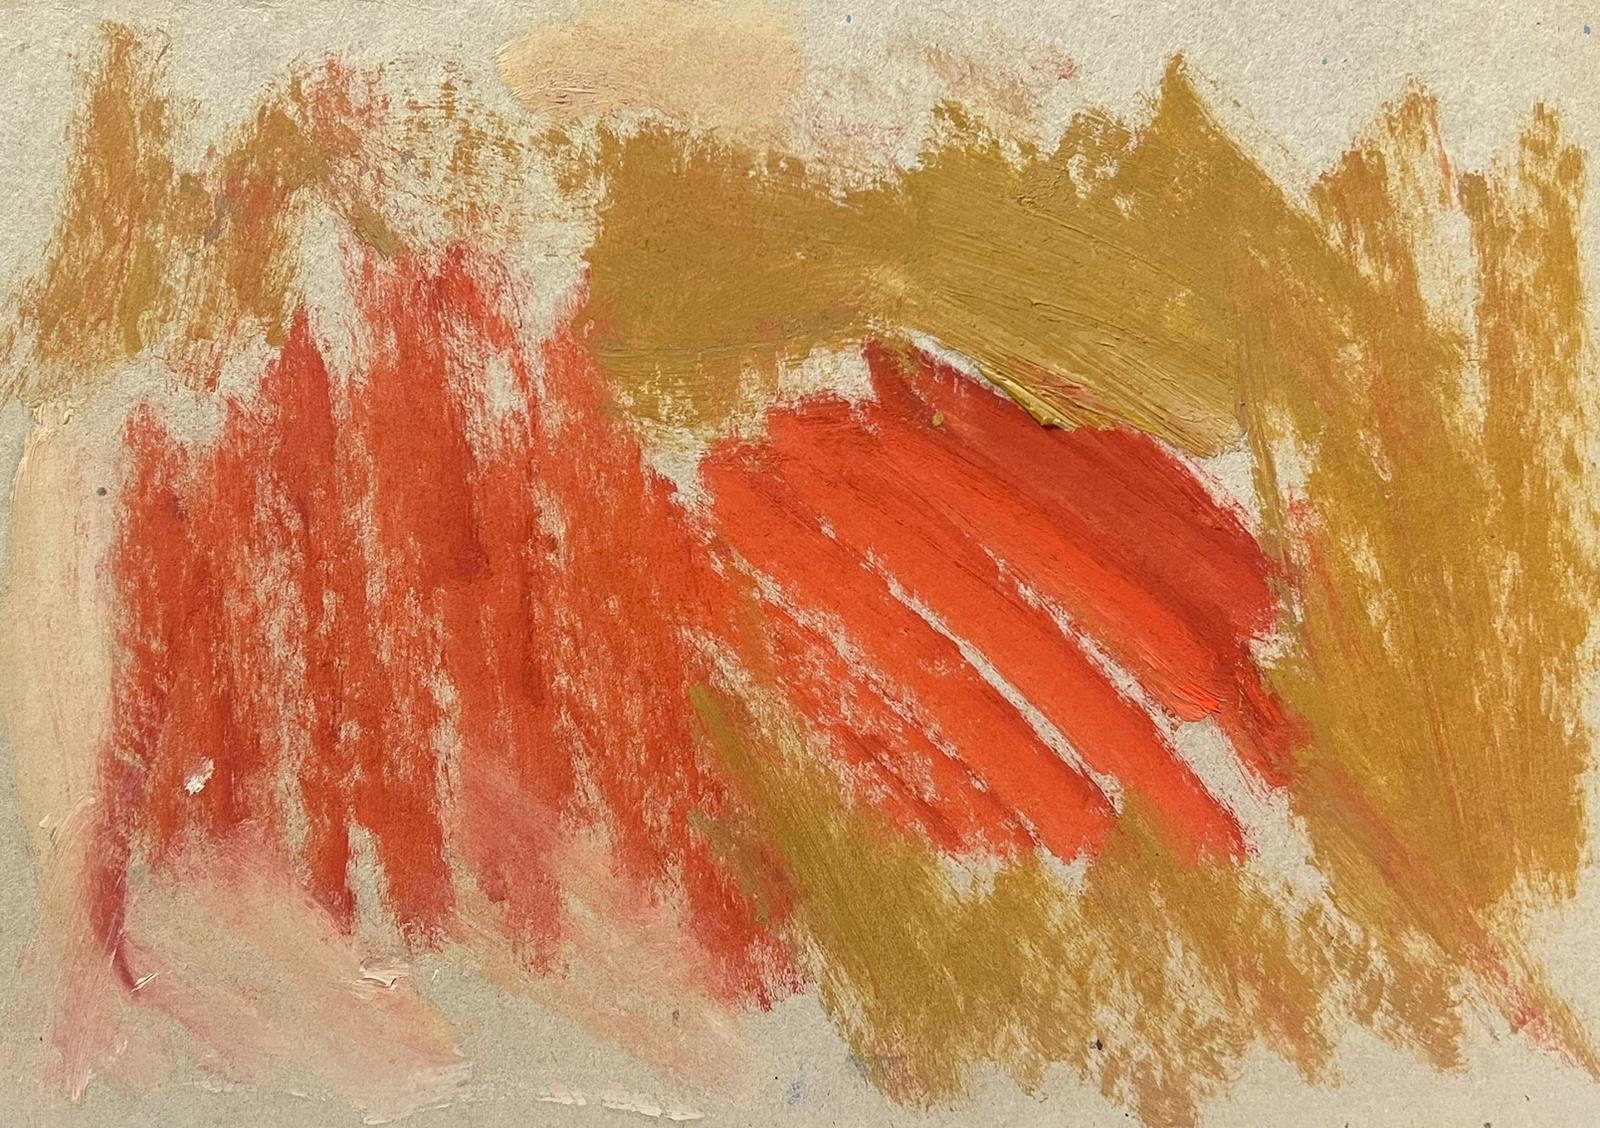 Elisabeth Hahn Abstract Painting - 20th Century German Modernist Oil Painting Orange and Red Abstract